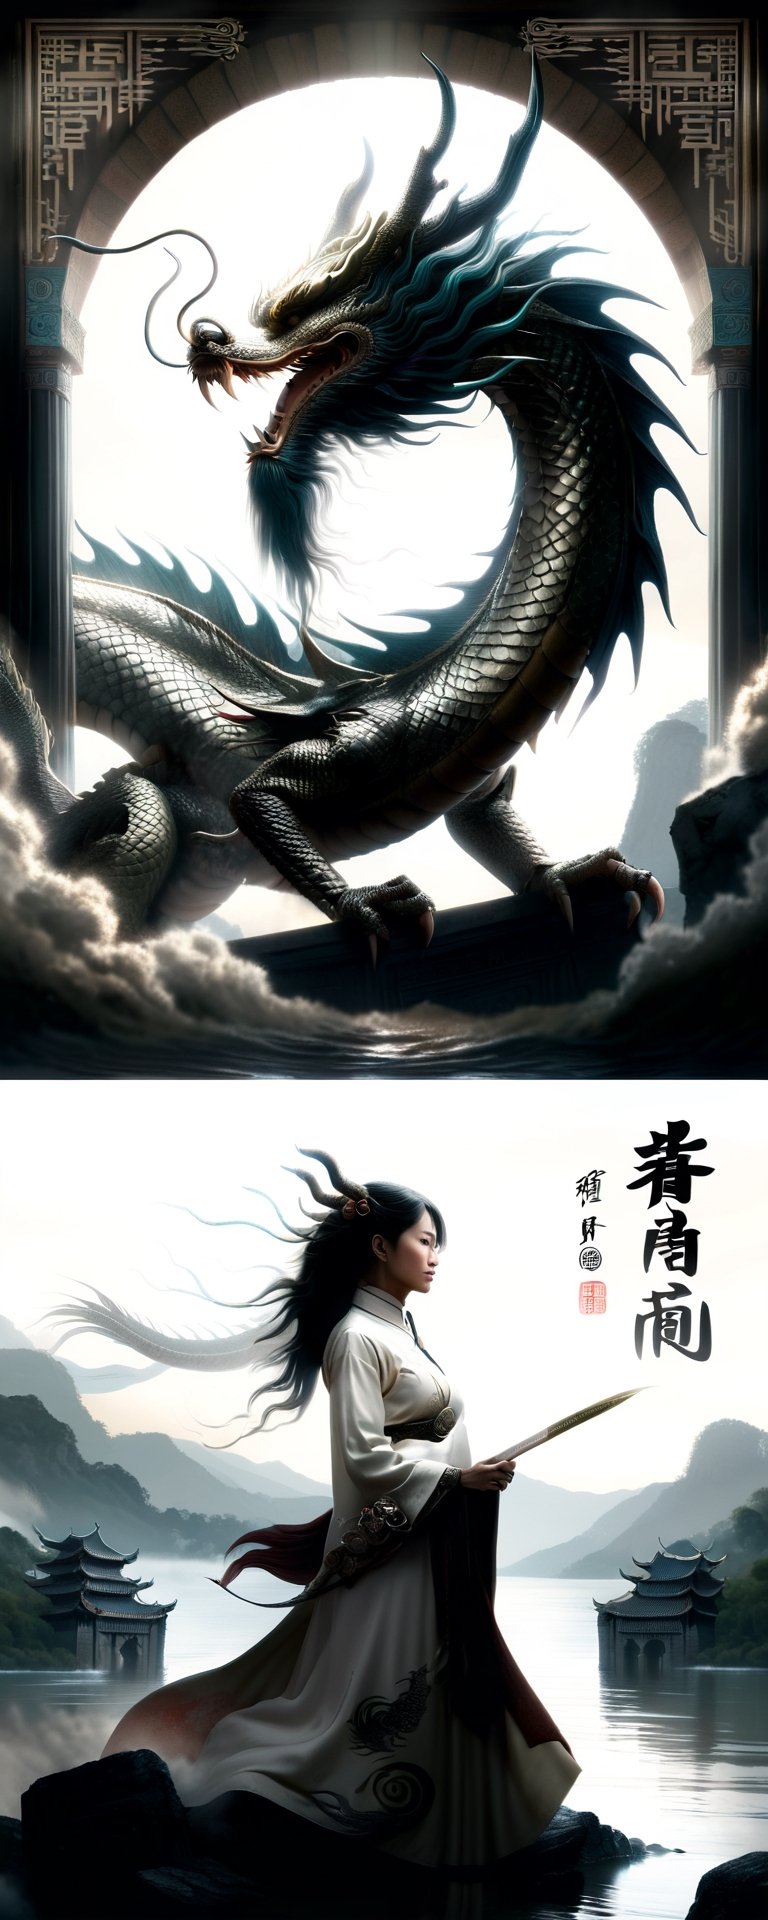 fusion of I Ching concepts 'Hidden dragon, do not act', 'The dragon appearing in the field', 'The dragon soars in the sky', and 'The dragon regrets when reaching too high', depicted with a girl wearing dragon armor, embodying the wisdom and power of these proverbs, majestic Chinese dragon elements in various forms, girl in dynamic pose with dragon-themed armor, rich symbolism, by FuturEvoLab, (masterpiece: 2), best quality, ultra highres, original, extremely detailed, perfect lighting, vibrant colors, powerful yet introspective mood, harmonious blend of tradition and fantasy, (dragon symbolism:1.5), (cultural fusion:1.3), (dynamic composition:1.2)